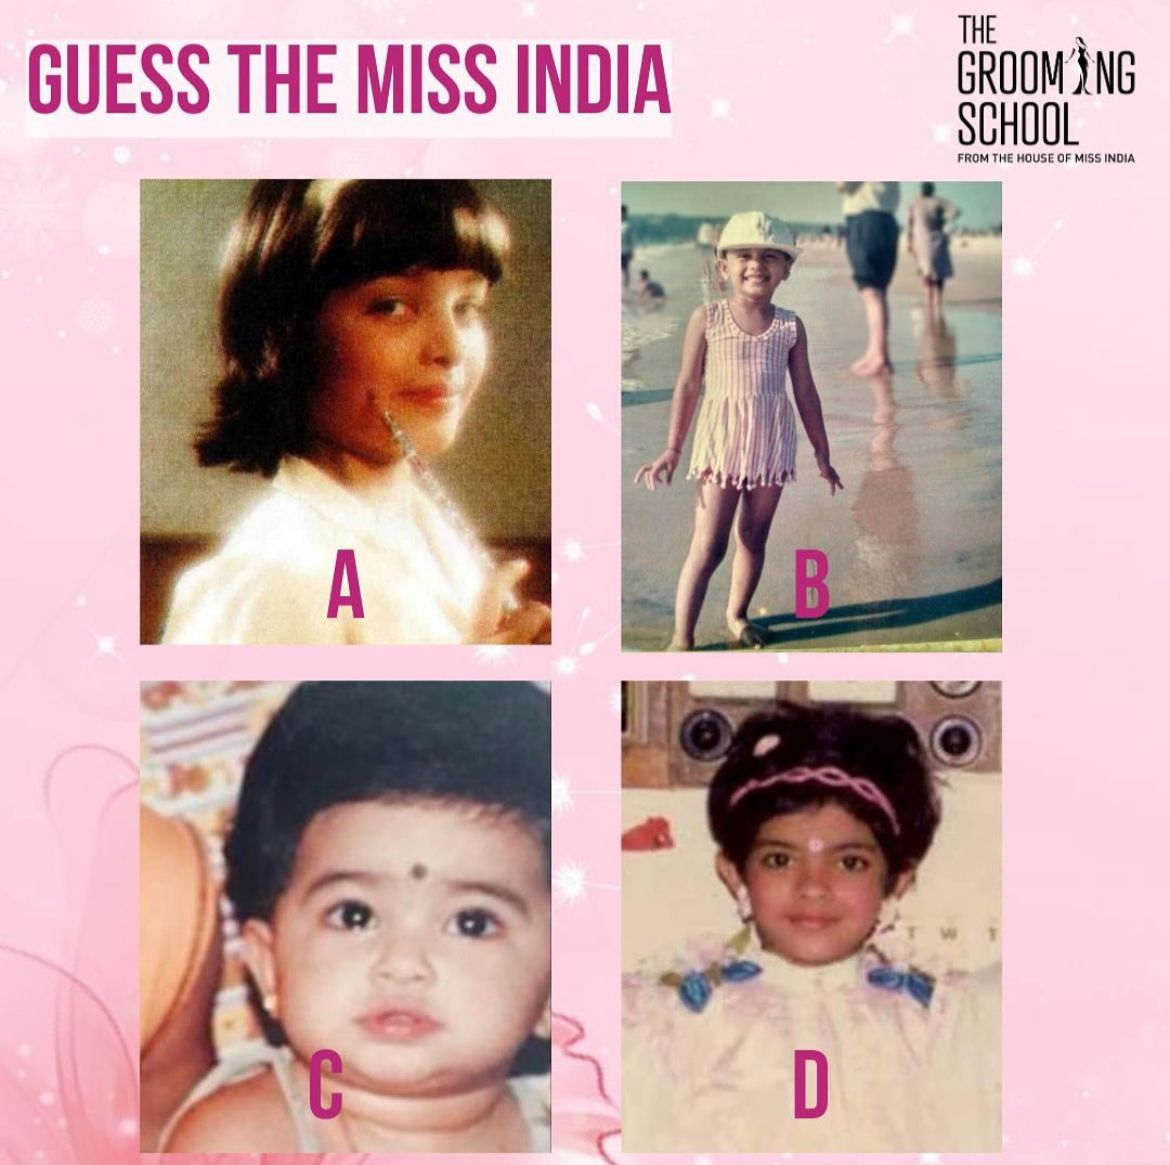 Can you recognize these little stars from their childhood days?
Hint: They all grew up to become crowned Miss India 👑
#MissIndia #guessthecelebrity #throwback